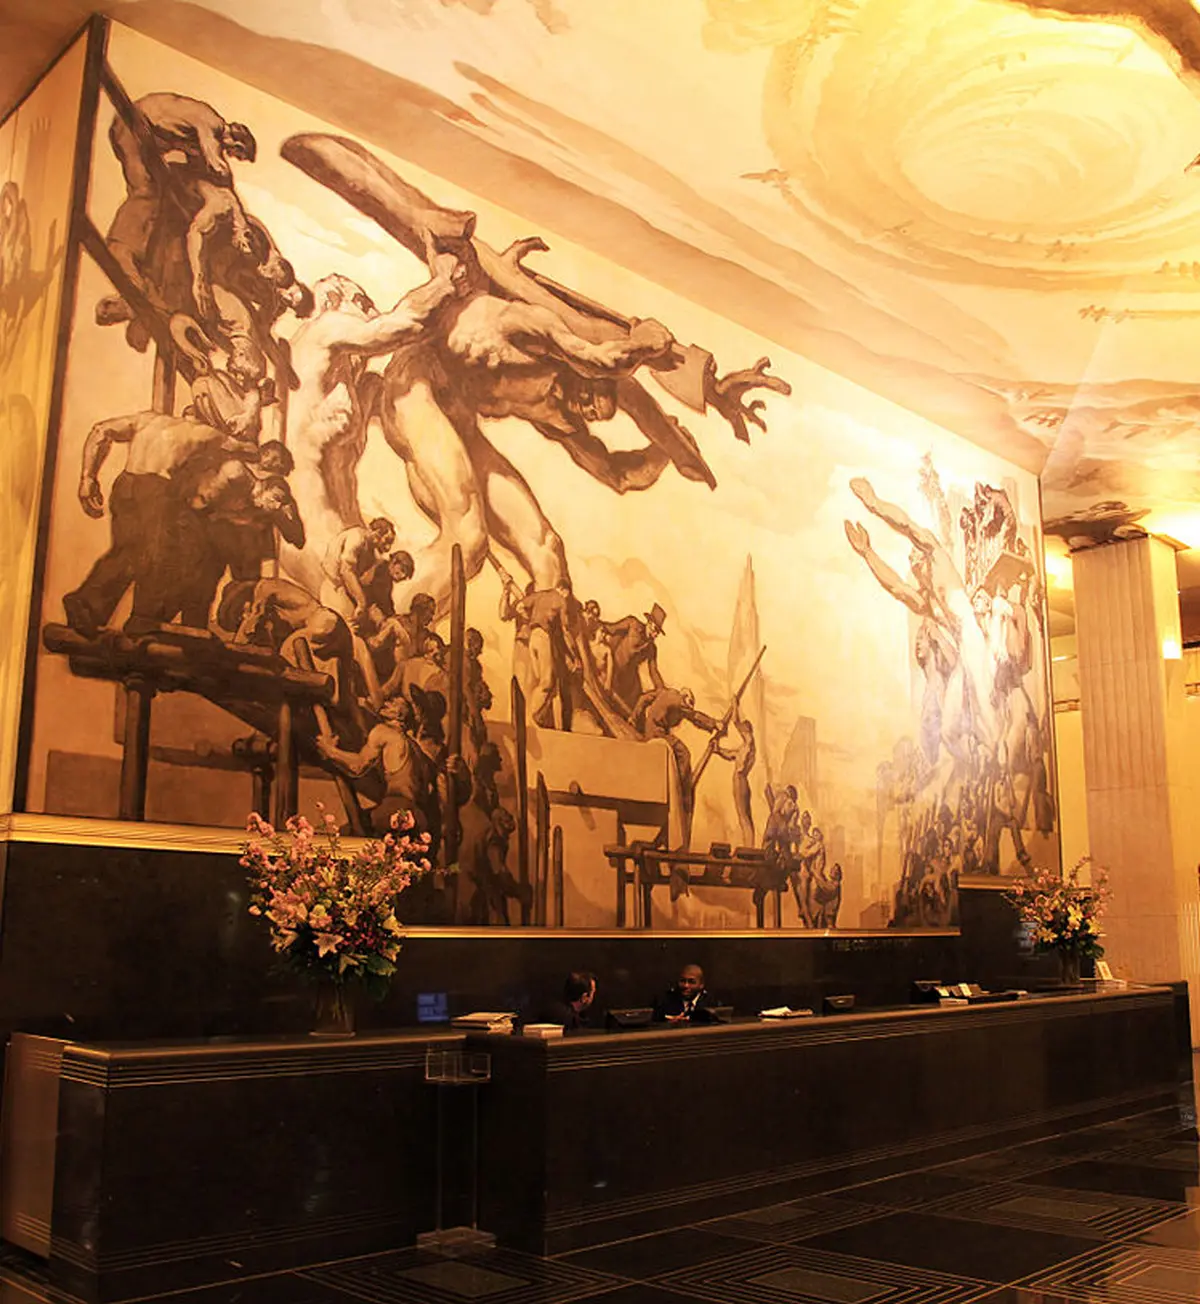 A painting by Catalan muralist Josep Maria Sert at New York City's Rockefeller Center entry hall